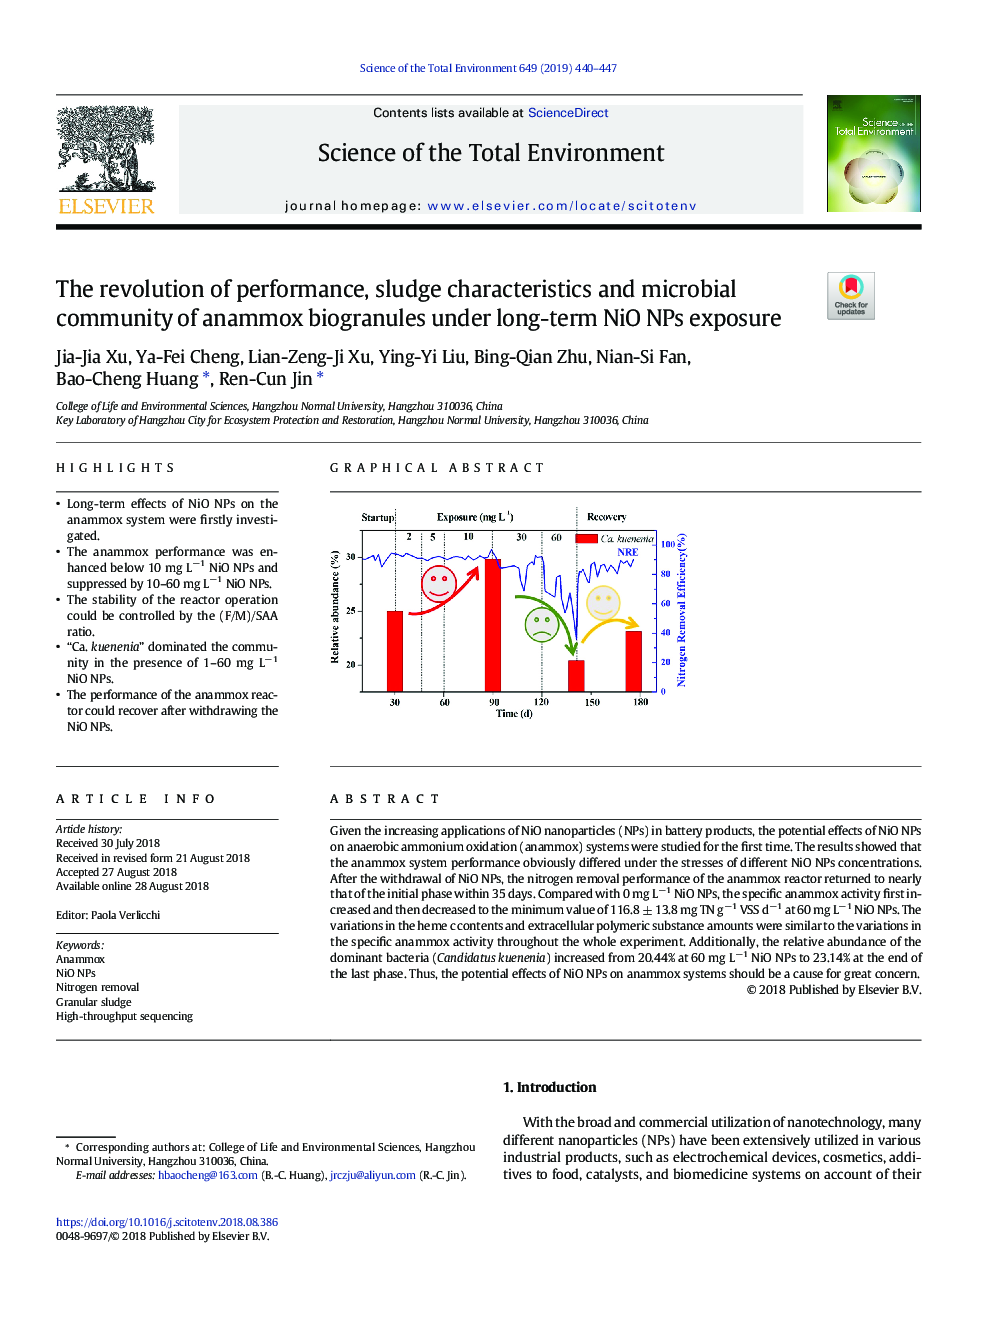 The revolution of performance, sludge characteristics and microbial community of anammox biogranules under long-term NiO NPs exposure